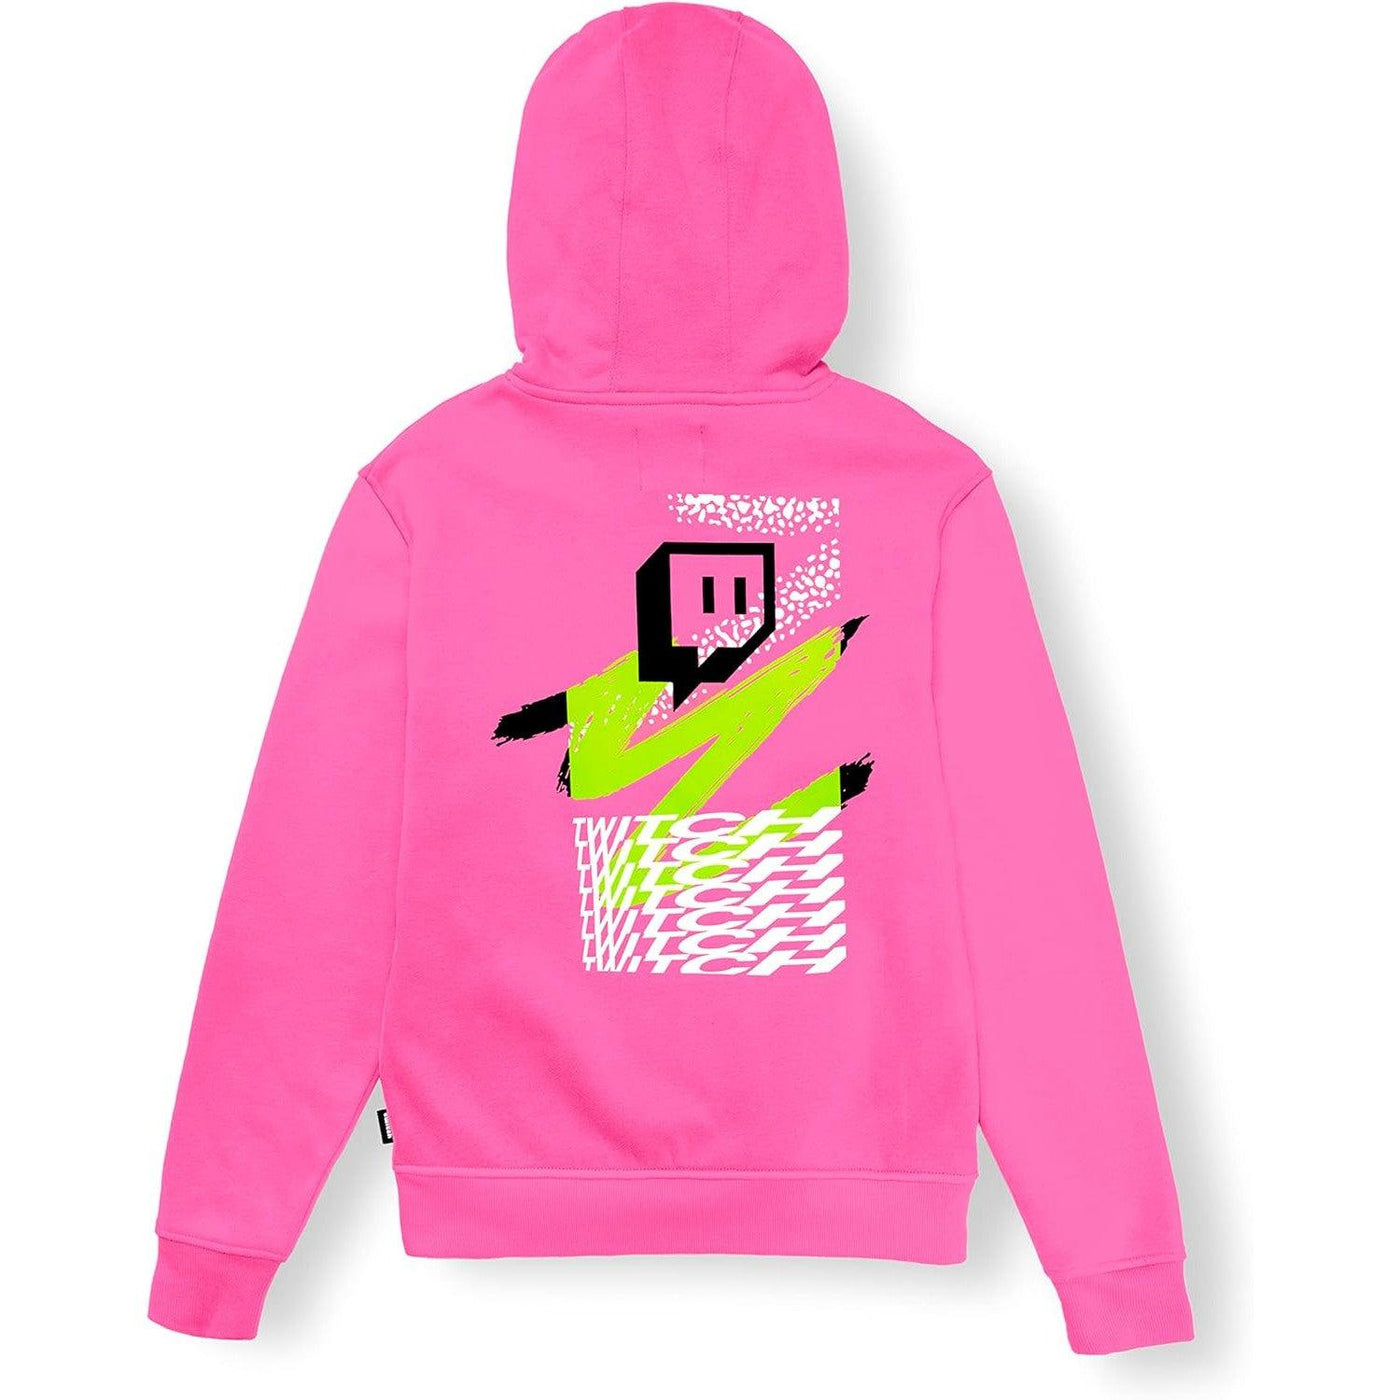 Twitch Hoodie Sweatshirt Pink hooded with Print on Both Sides - Massive Discounts